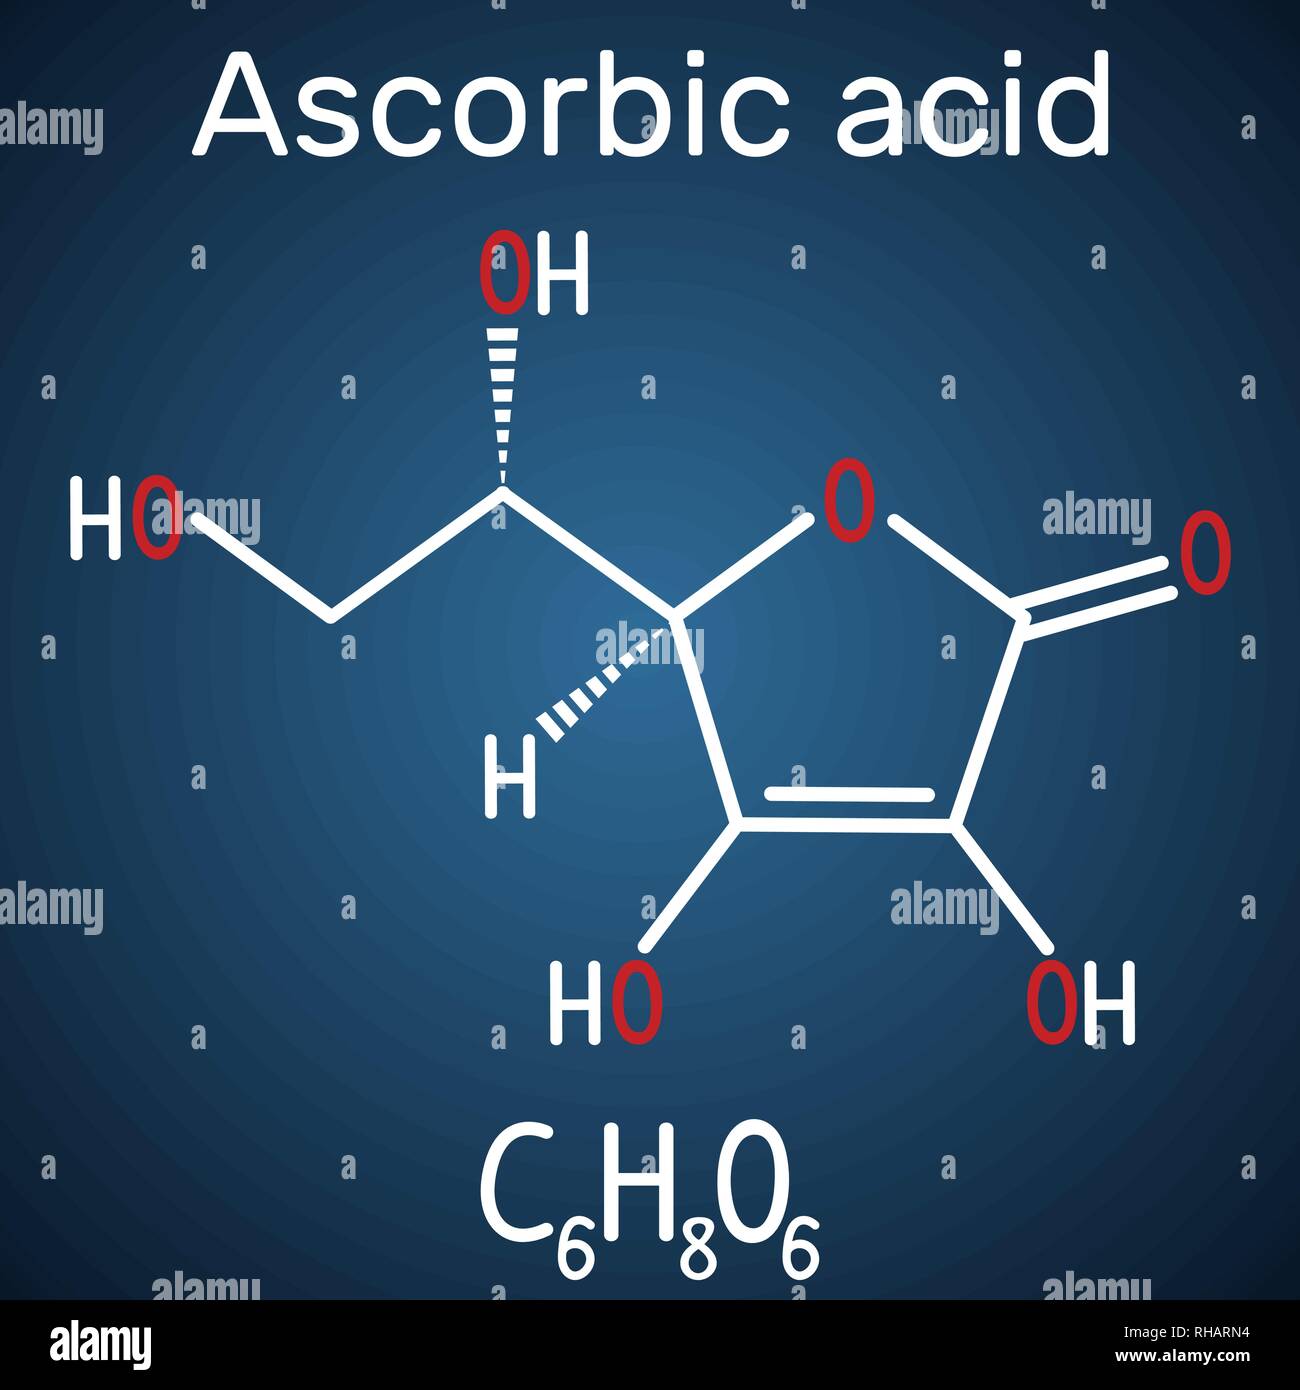 Ascorbic acid (vitamin C). Structural chemical formula and molecule model on the dark blue background. Vector illustration Stock Vector